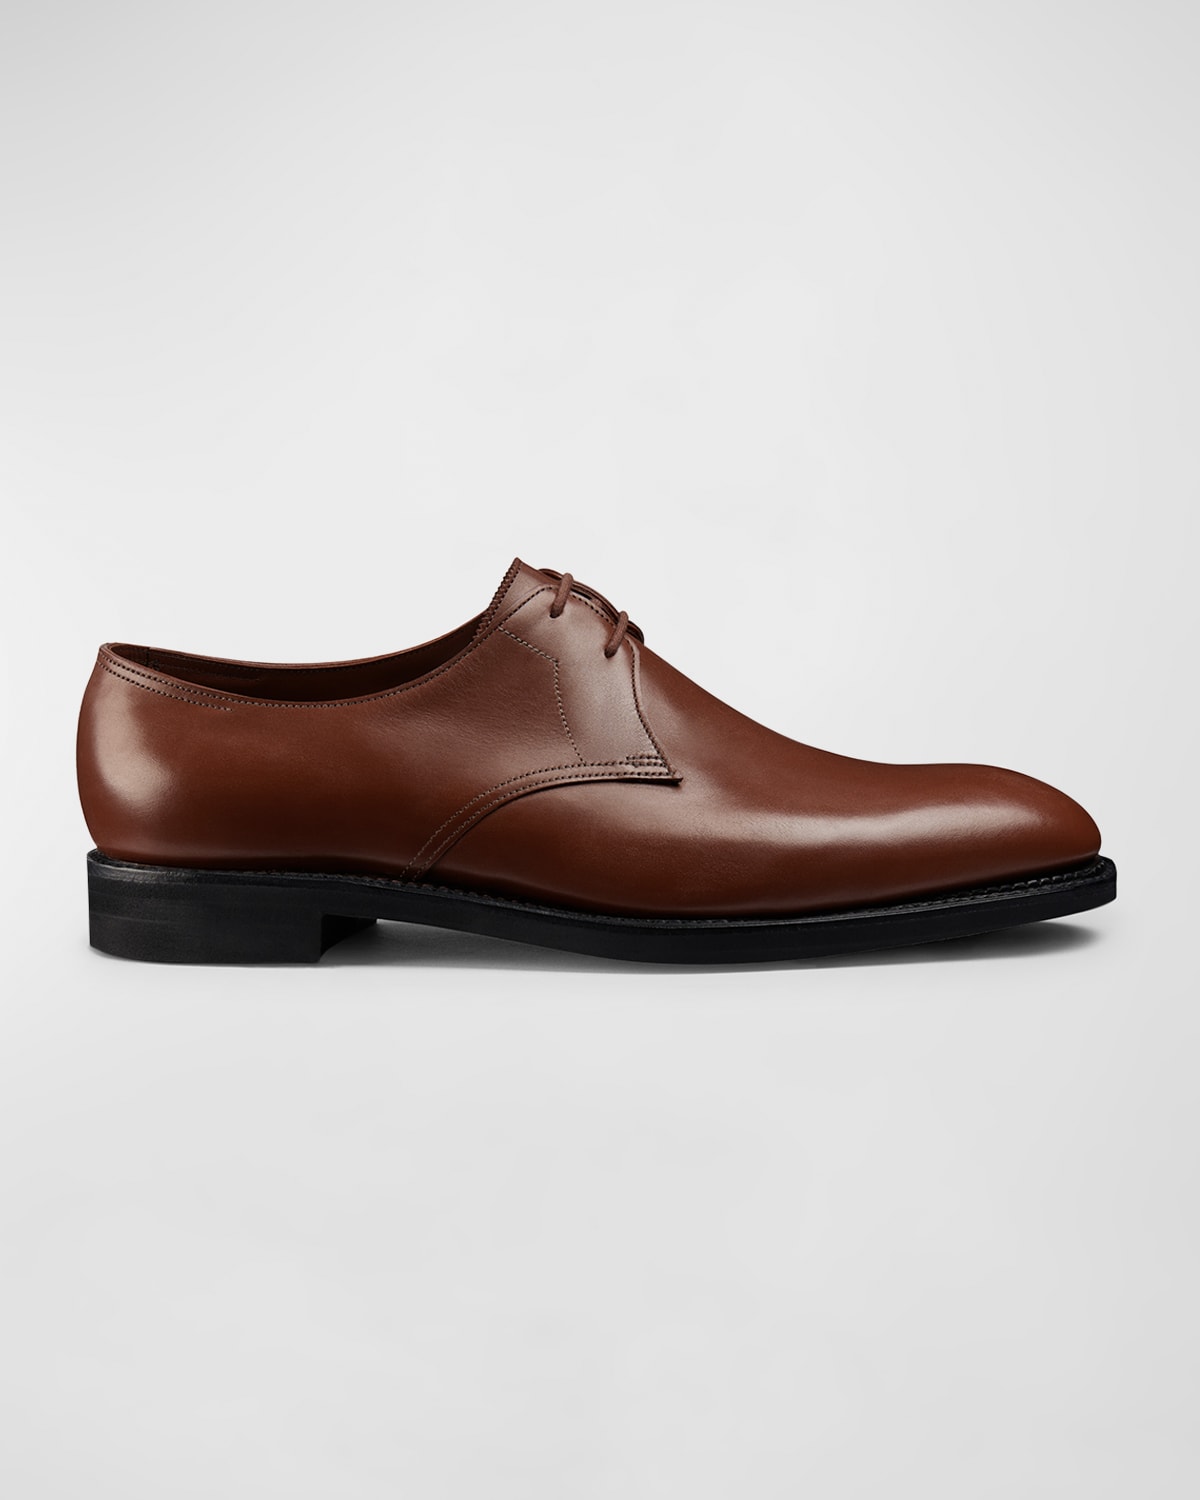 Loafers Corthay Shoes at Neiman Marcus